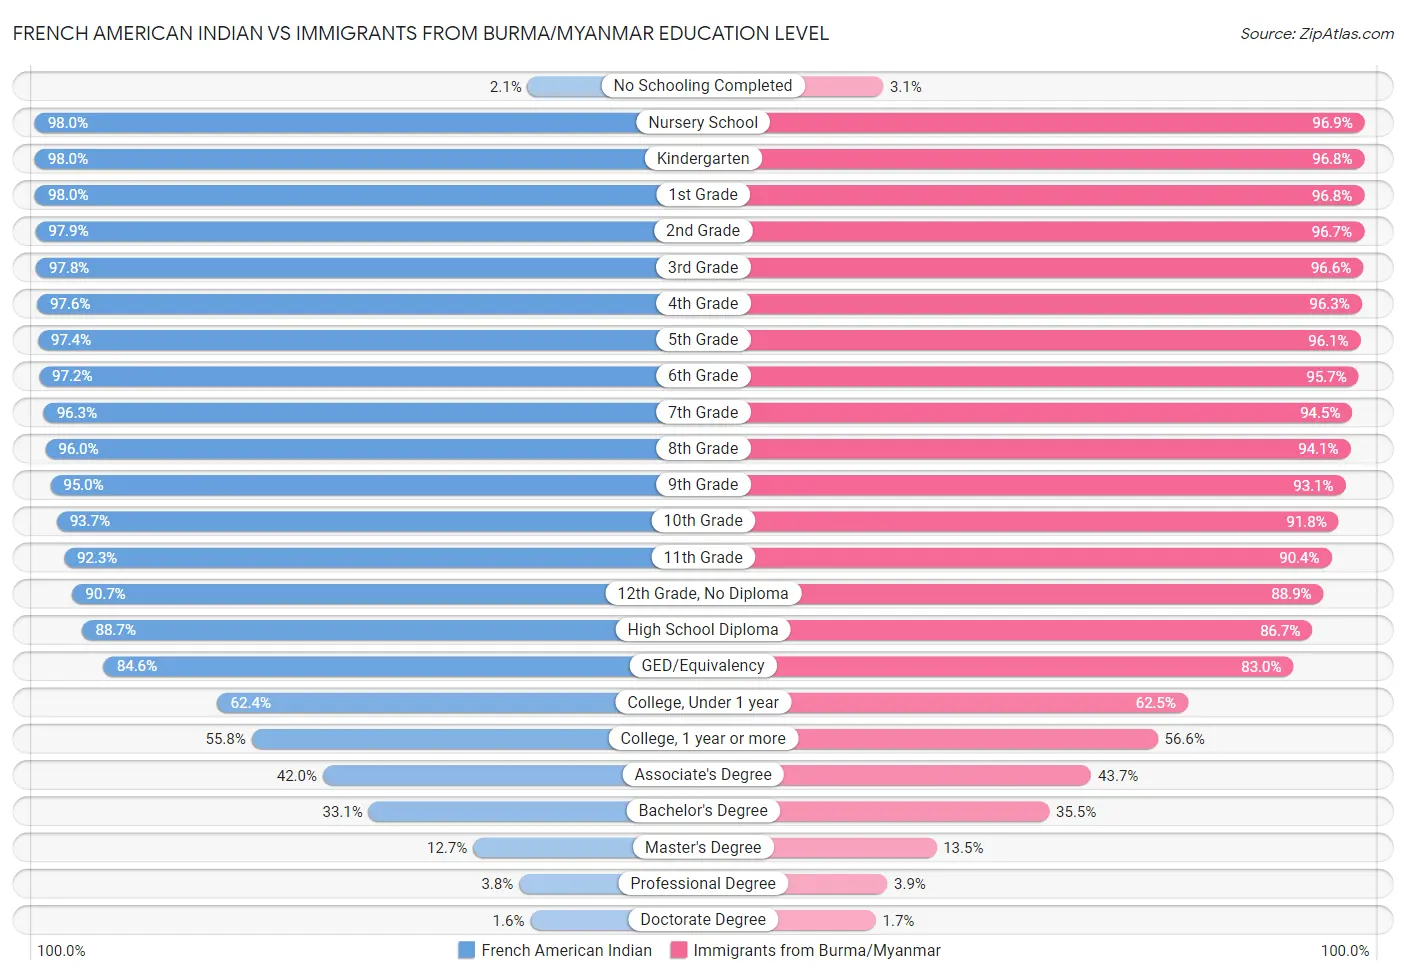 French American Indian vs Immigrants from Burma/Myanmar Education Level